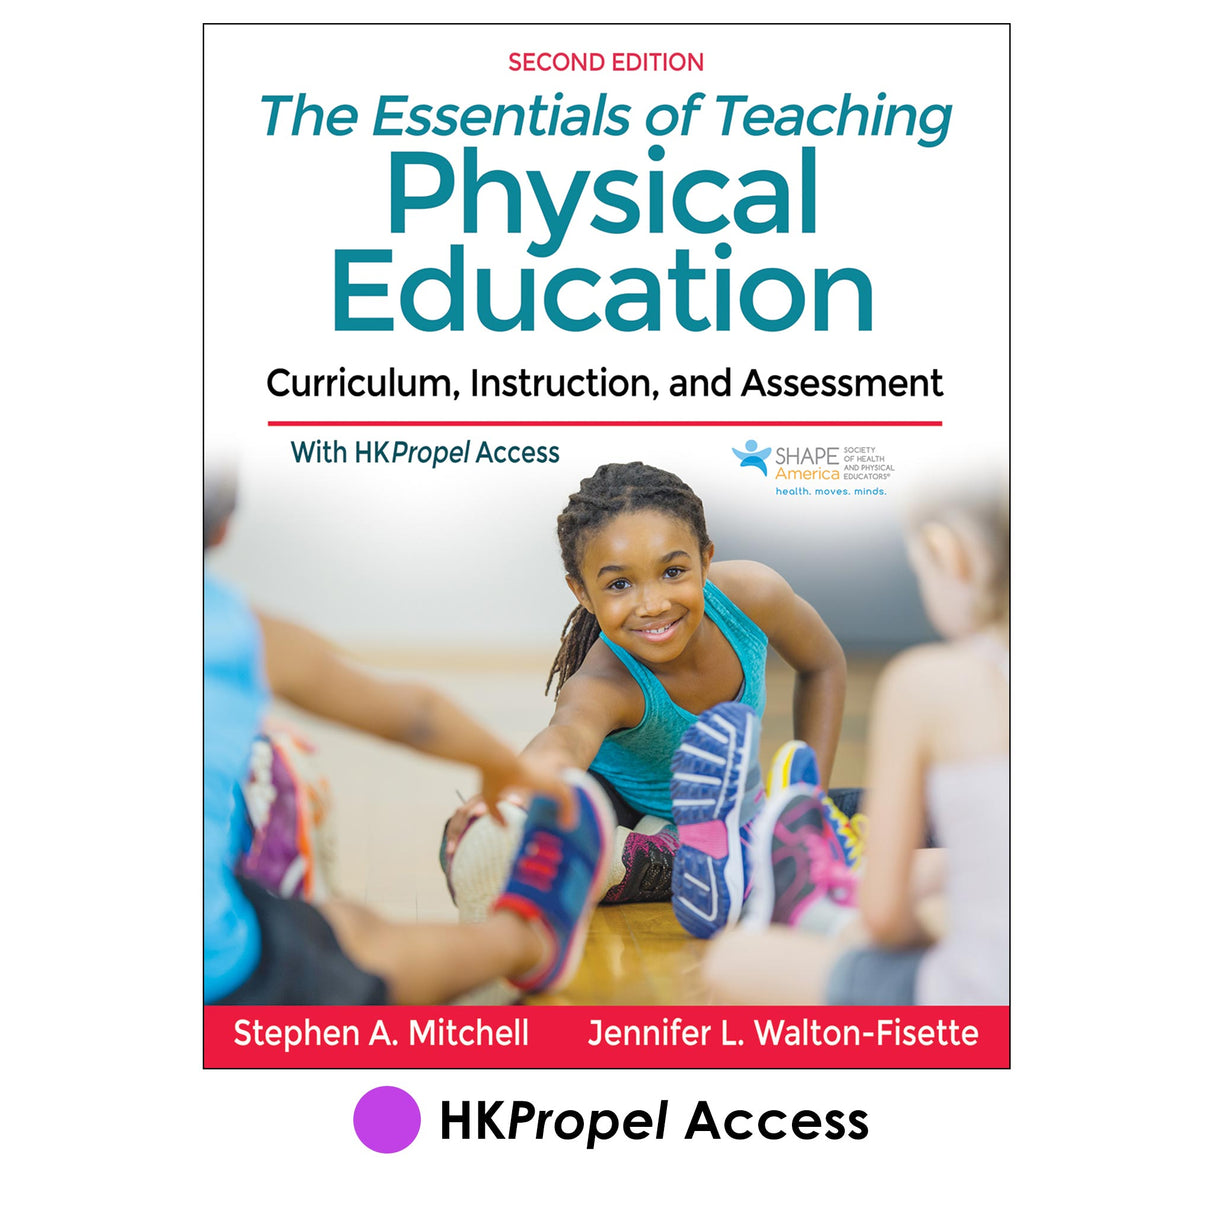 Essentials of Teaching Physical Education 2nd Edition HKPropel Access, The